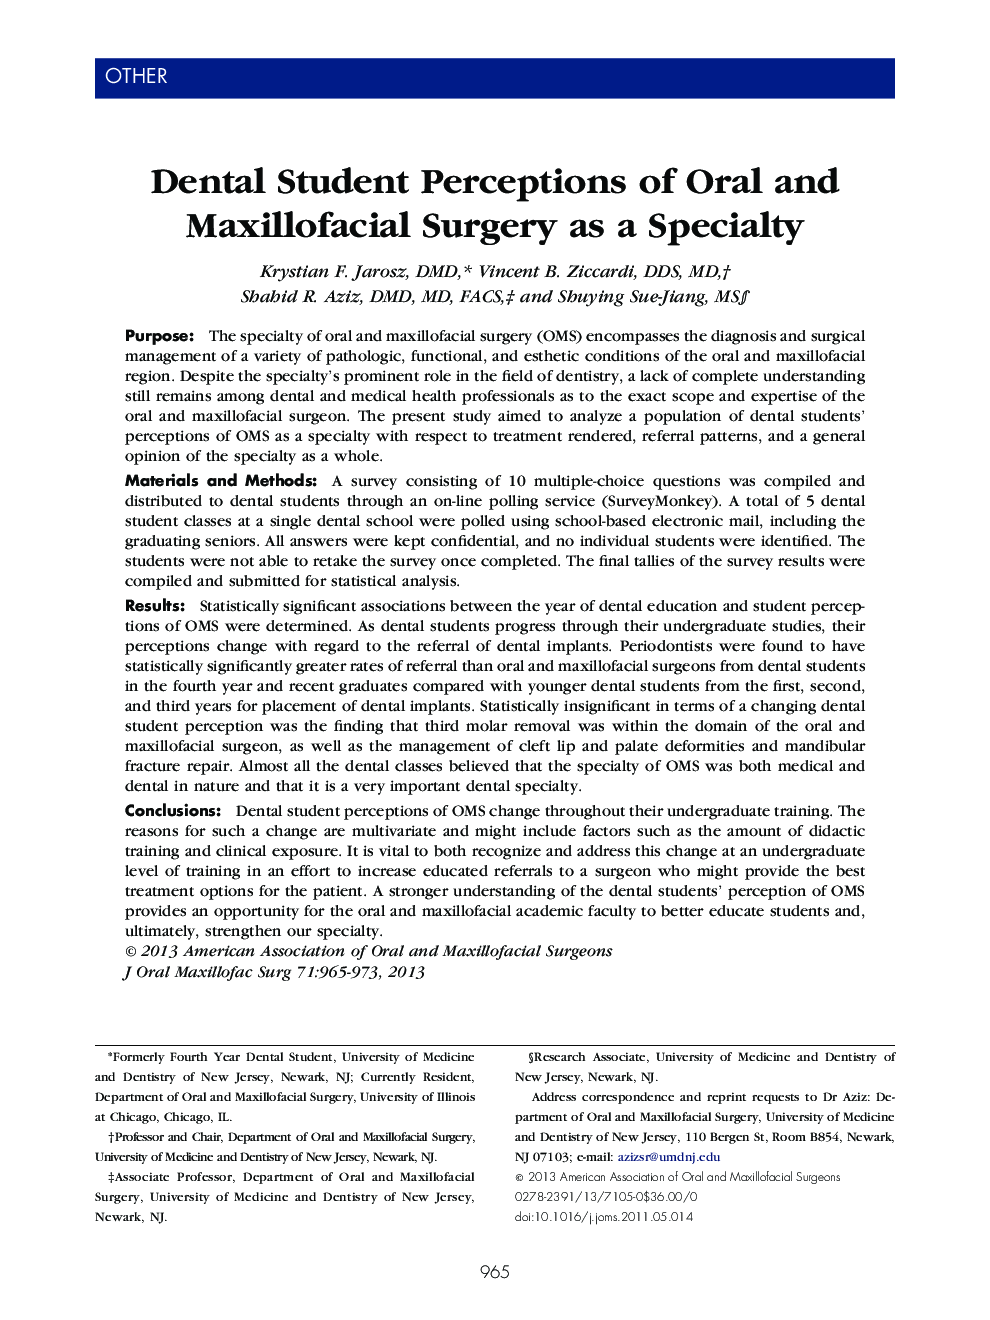 Dental Student Perceptions of Oral and Maxillofacial Surgery as a Specialty